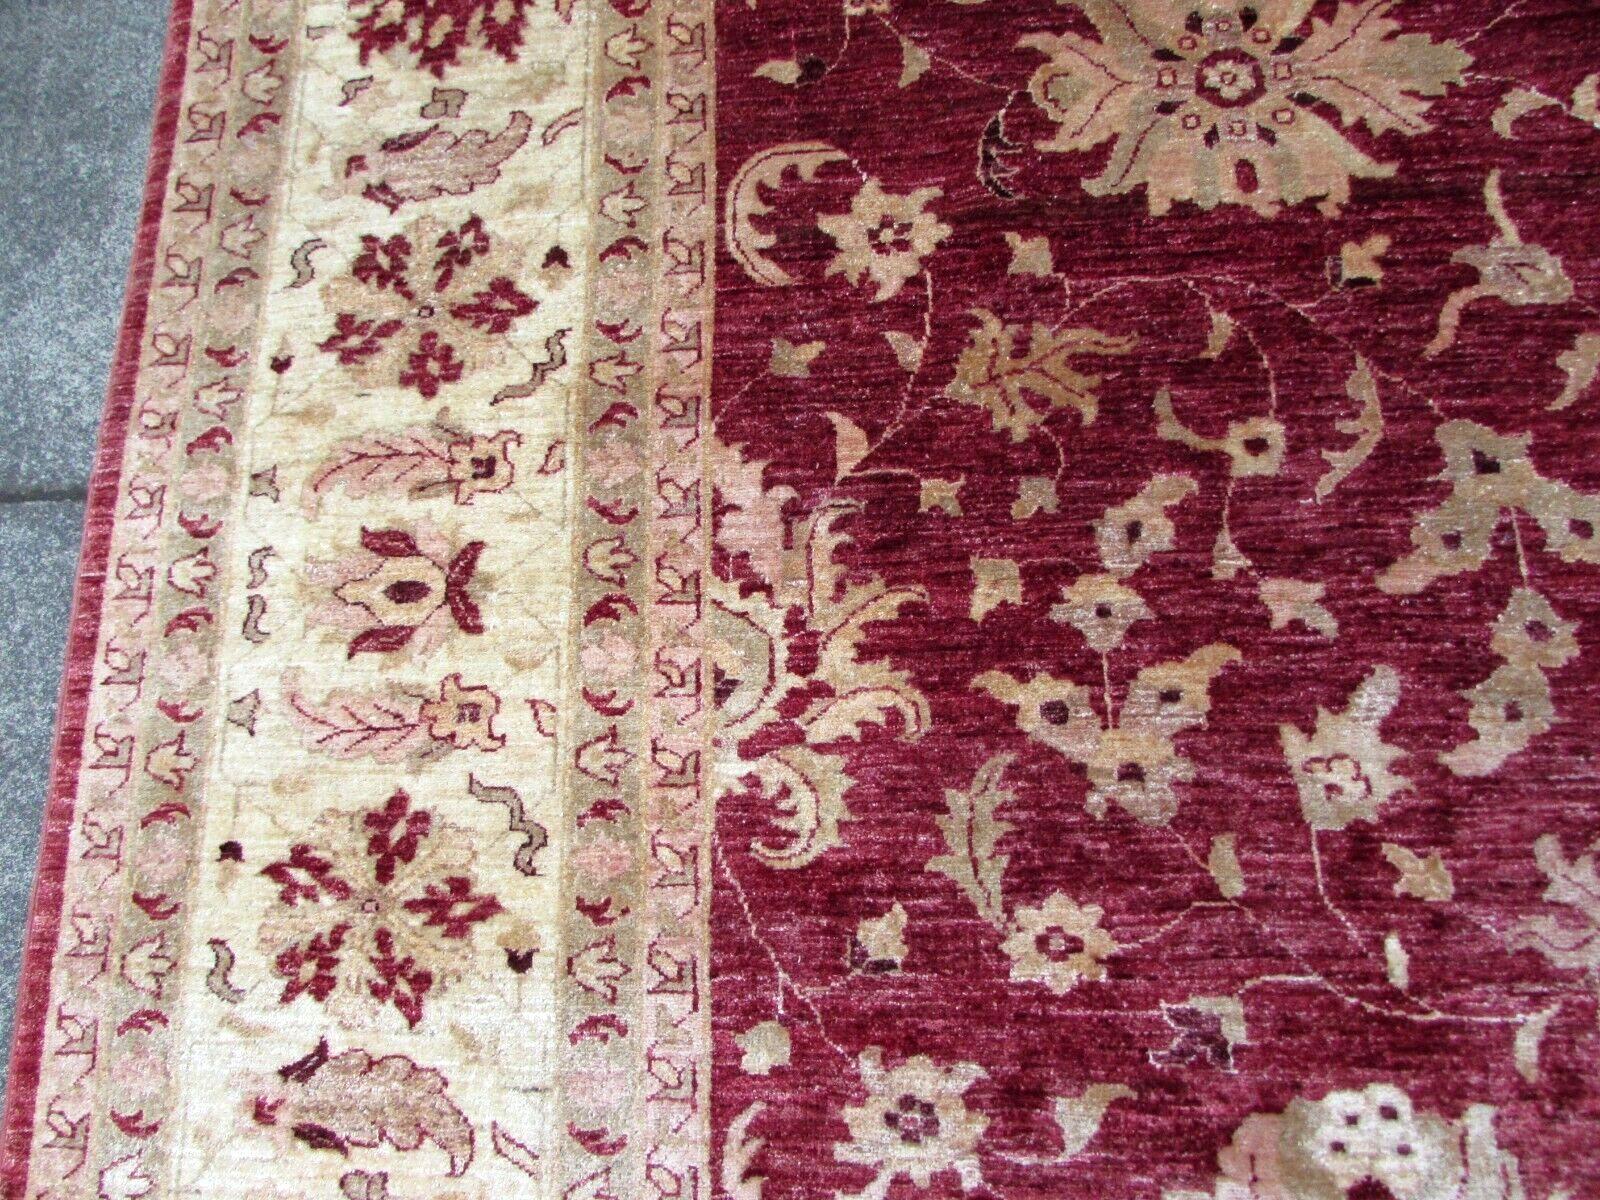 Late 20th Century Handmade Vintage Afghan Zigler Red and Beige Rug 9.7' x 12.8', 1980s, 1Q36 For Sale